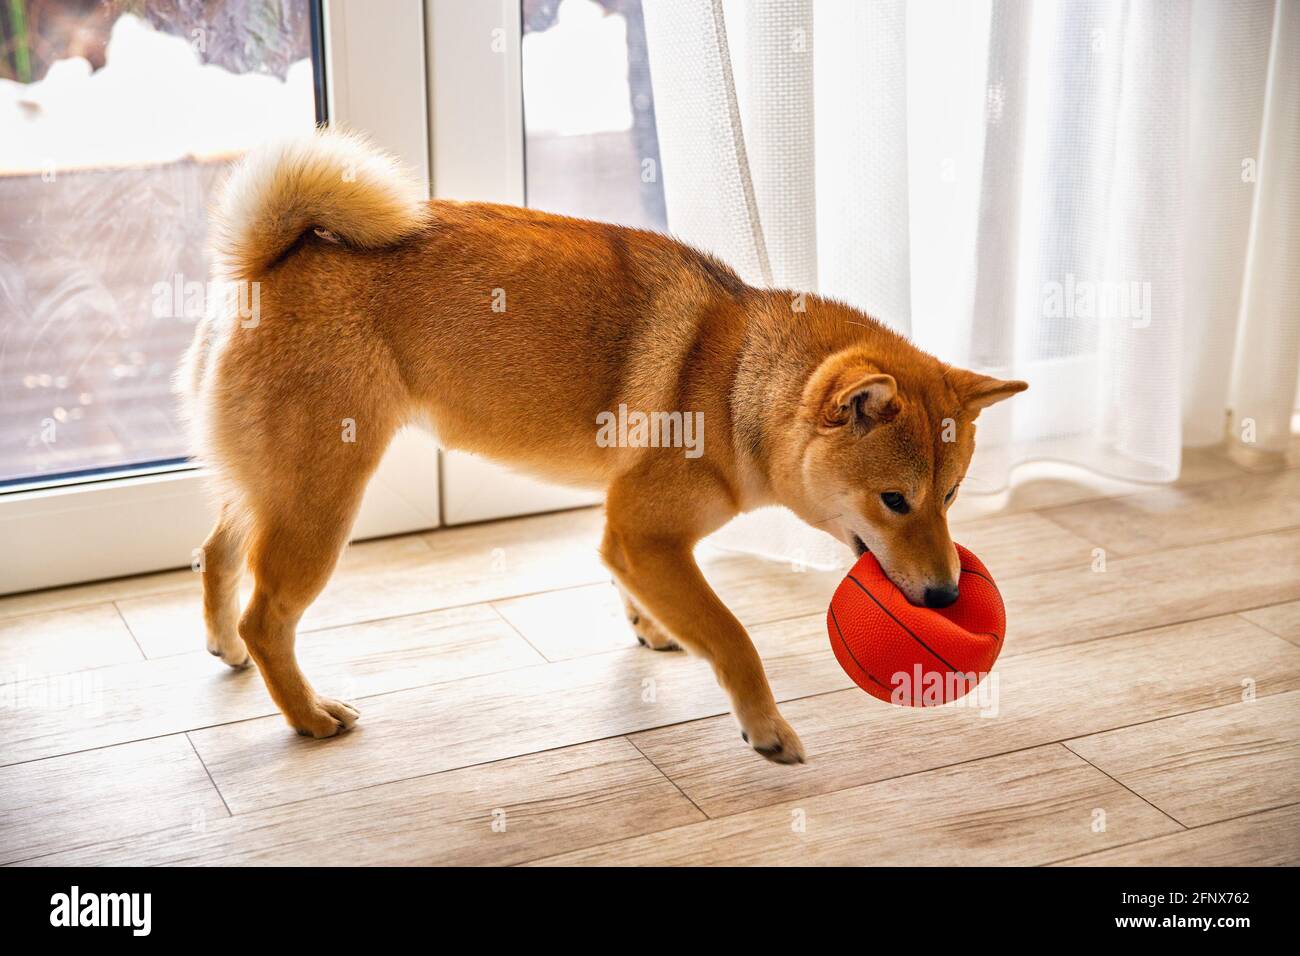 Shiba Inu female dog in the room closeup. Red haired Japanese dog 1 year old. A happy domestic pet. Stock Photo